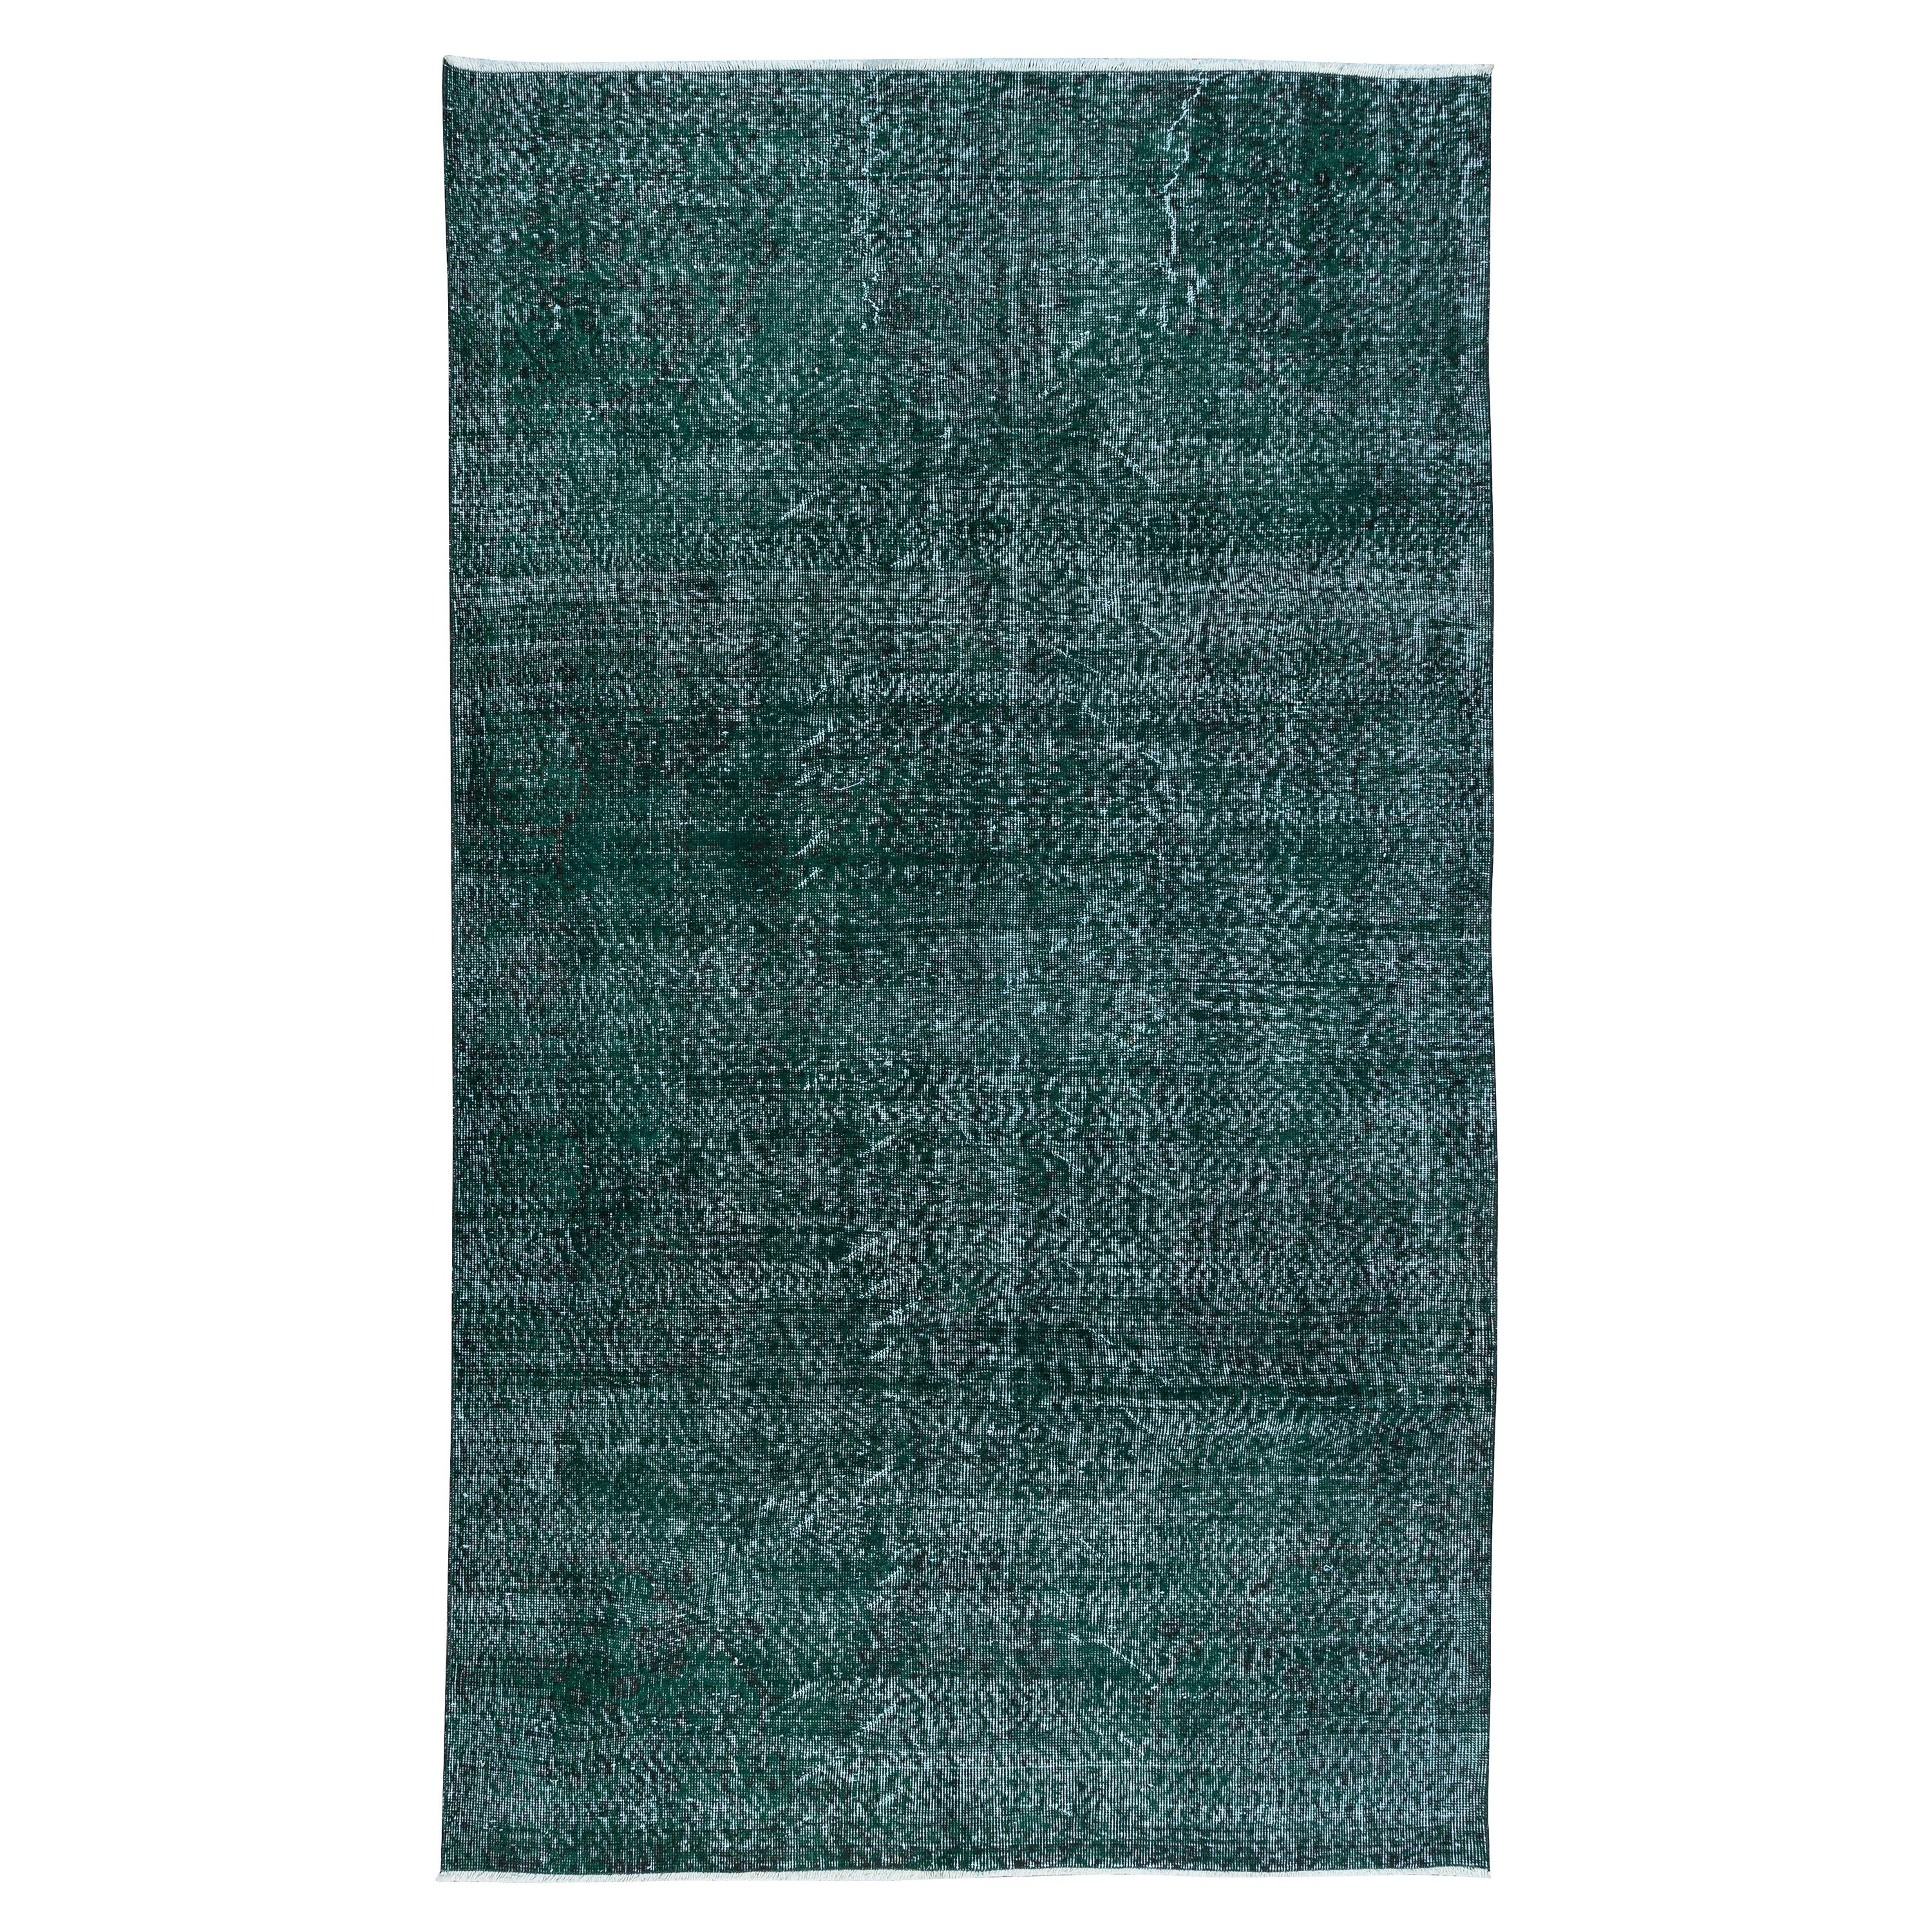 5x8.6 Ft Handknotted Green Area Rug for Dining Room, Living Room & Bedroom Decor For Sale